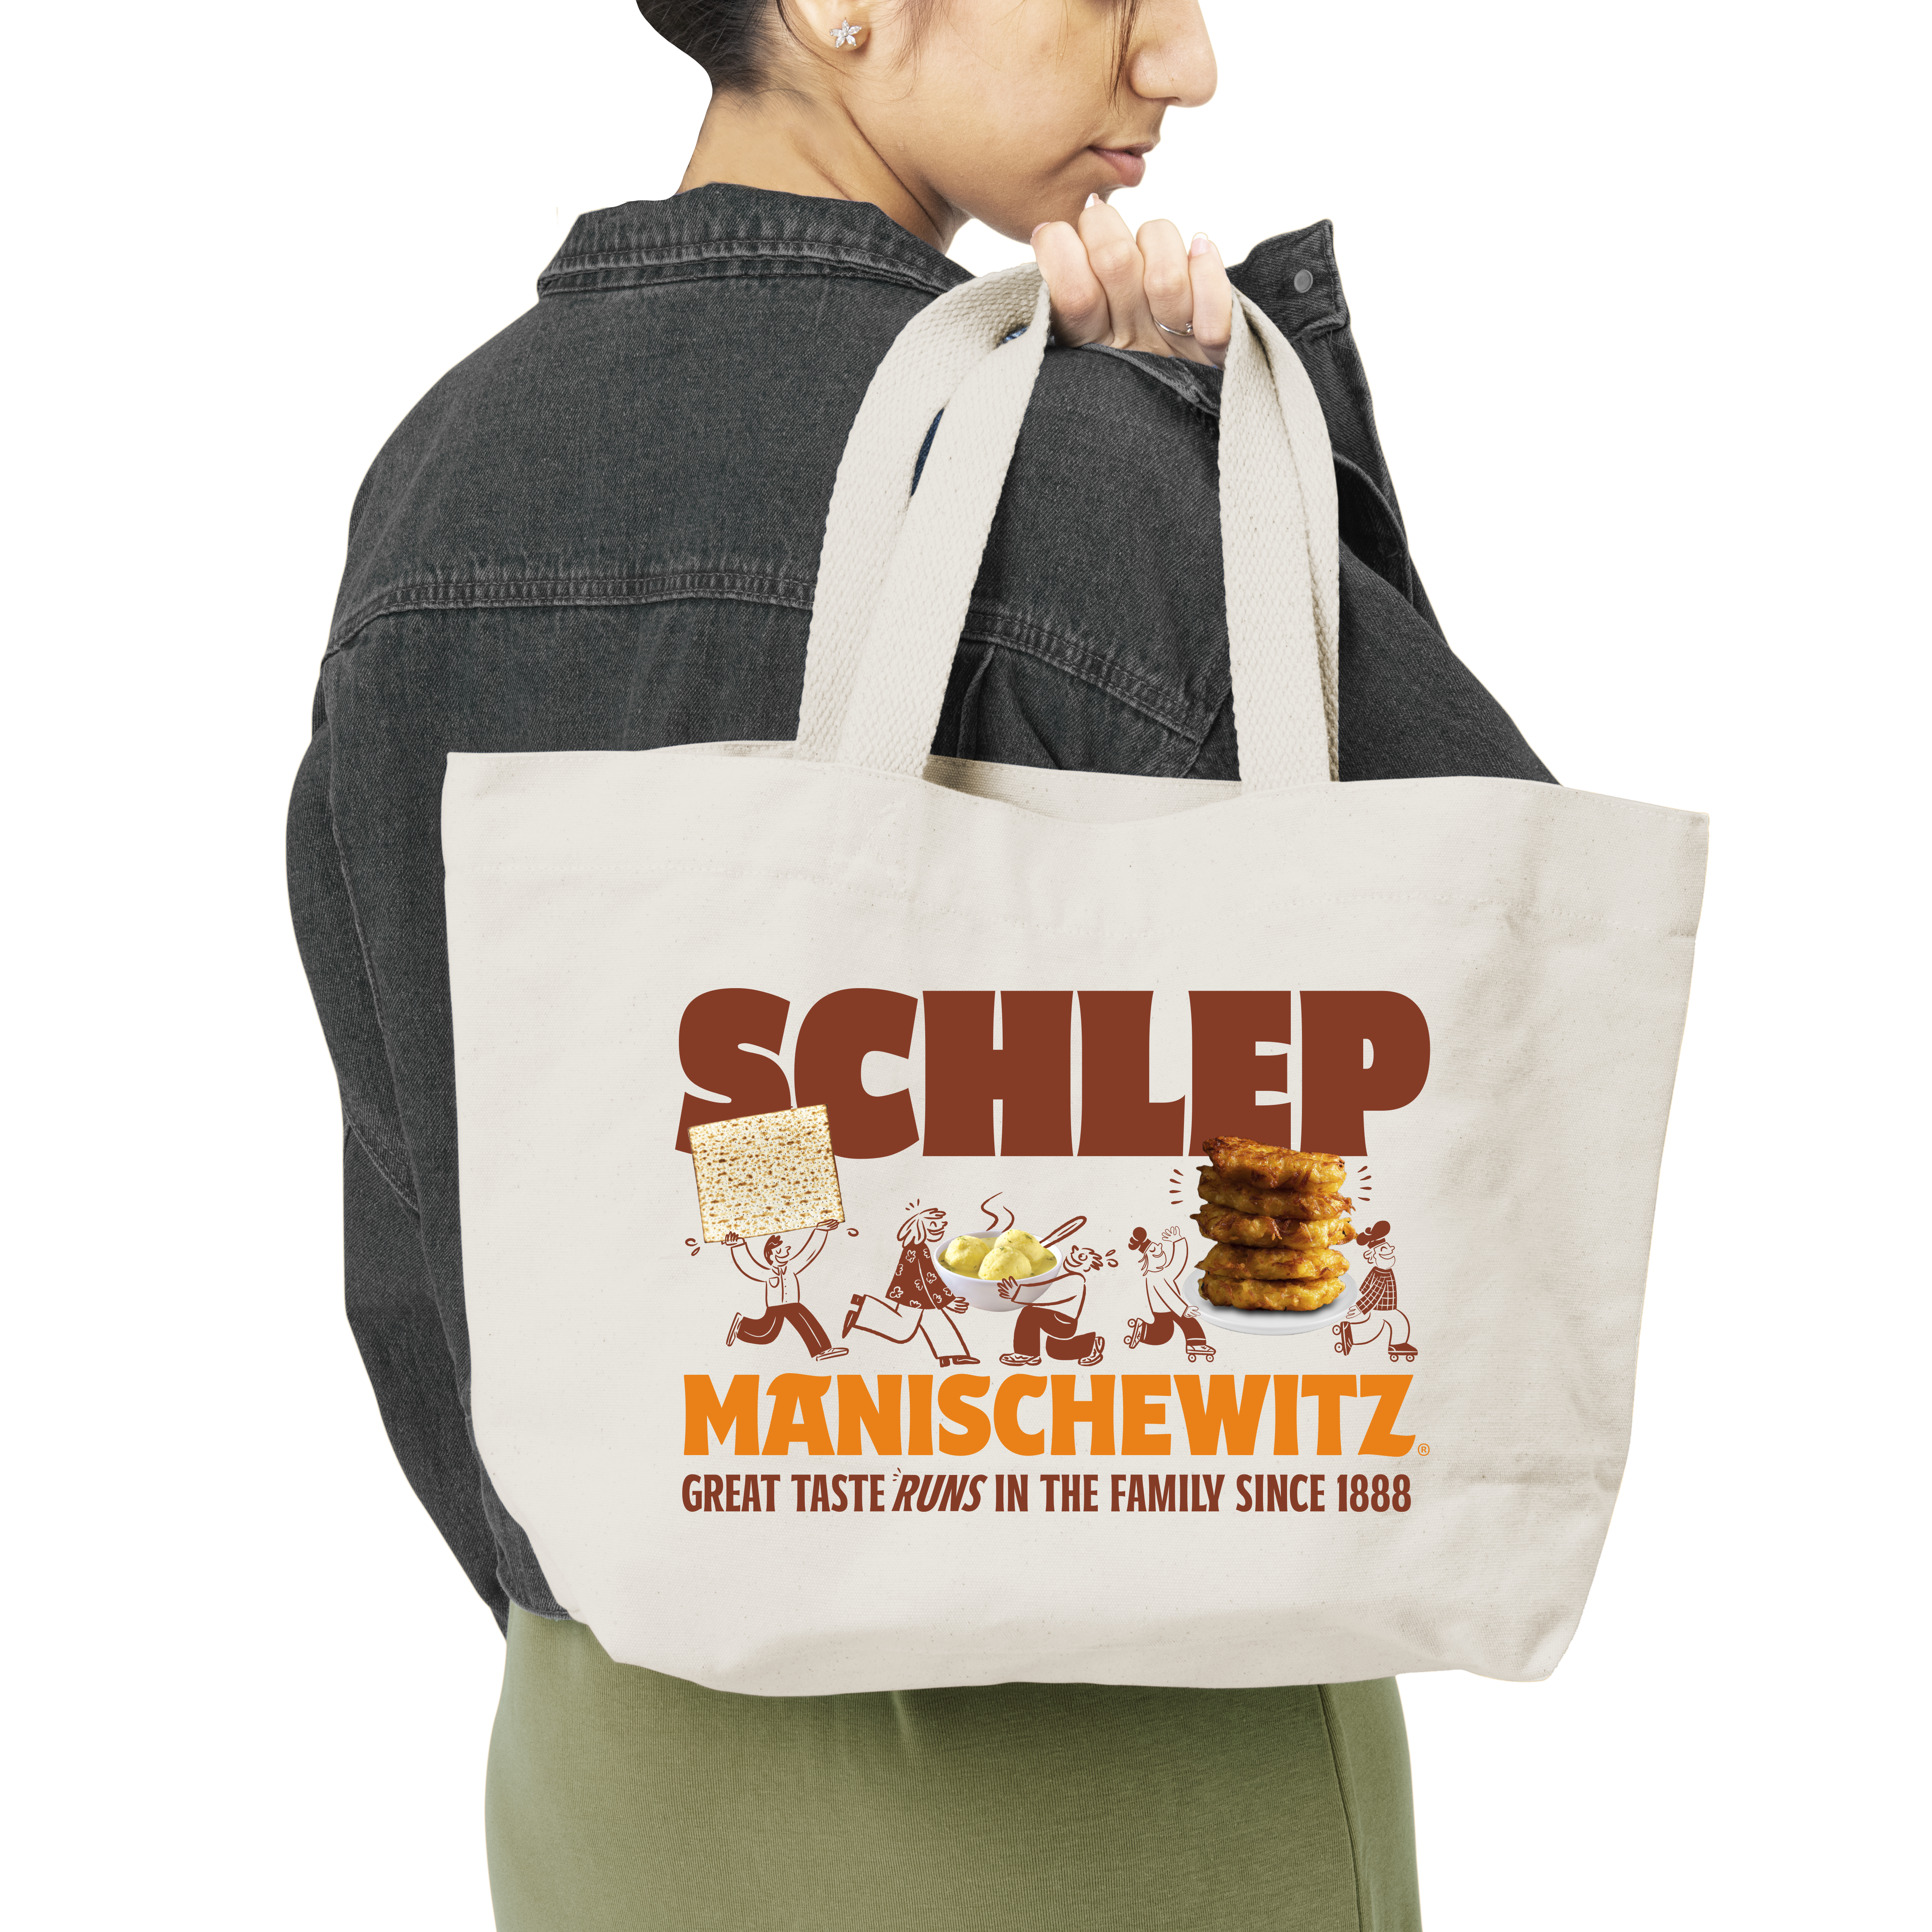 Can kosher food be hip? Manischewitz is betting its rebrand on it
	